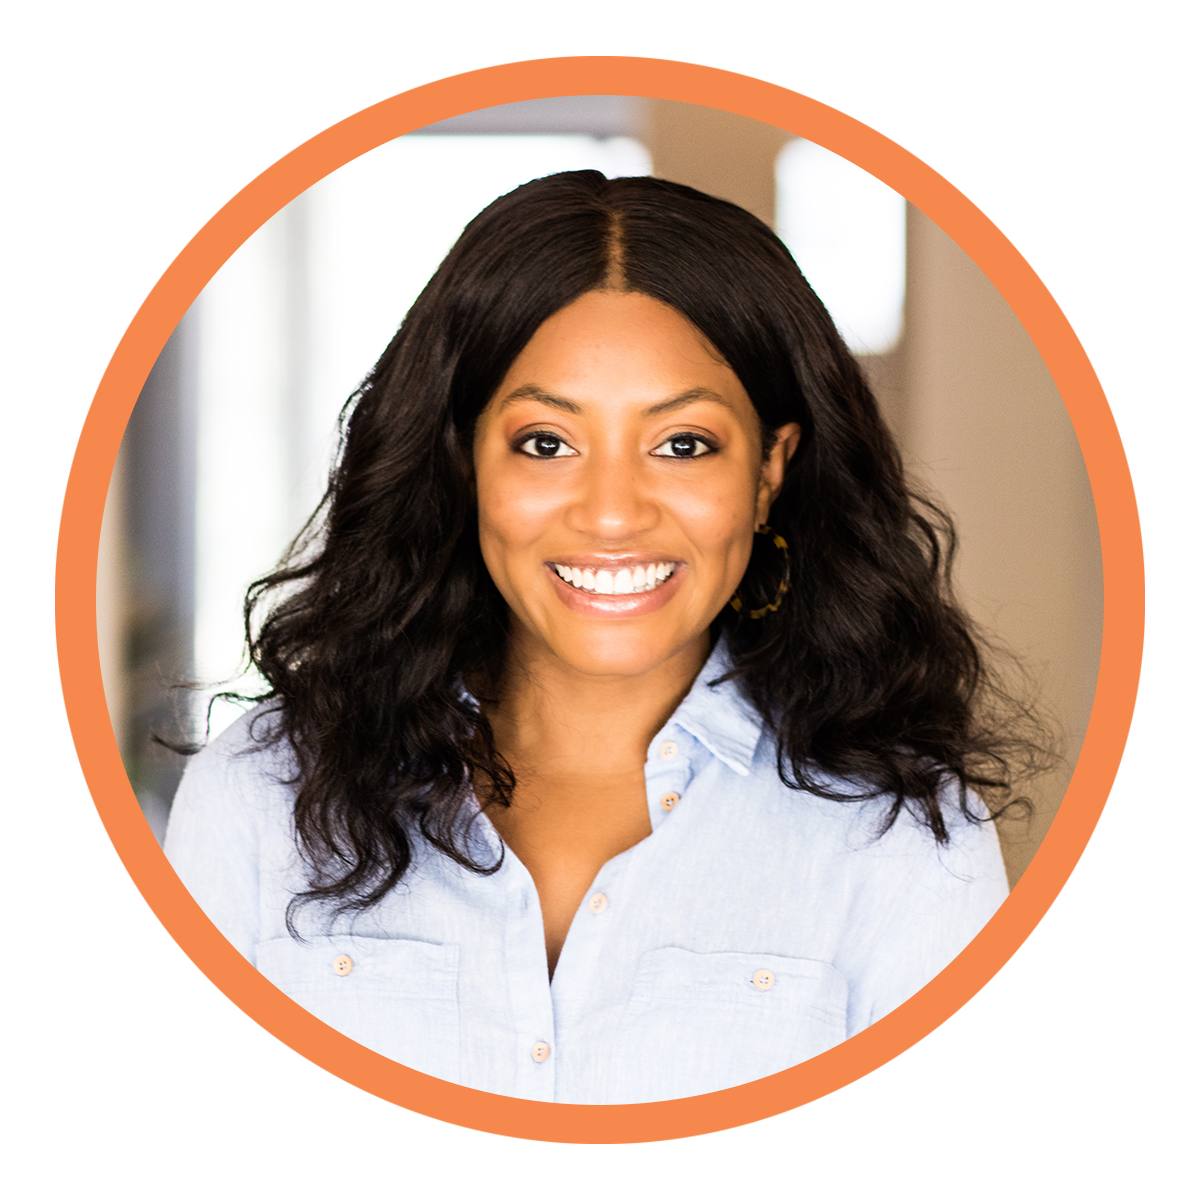  Krystal Hargrove is a digital marketing consultant and UX designer with ten years of experience working with nonprofit organizations. She resides in Lake Highlands with her cheeky dachshund, Oscar. 